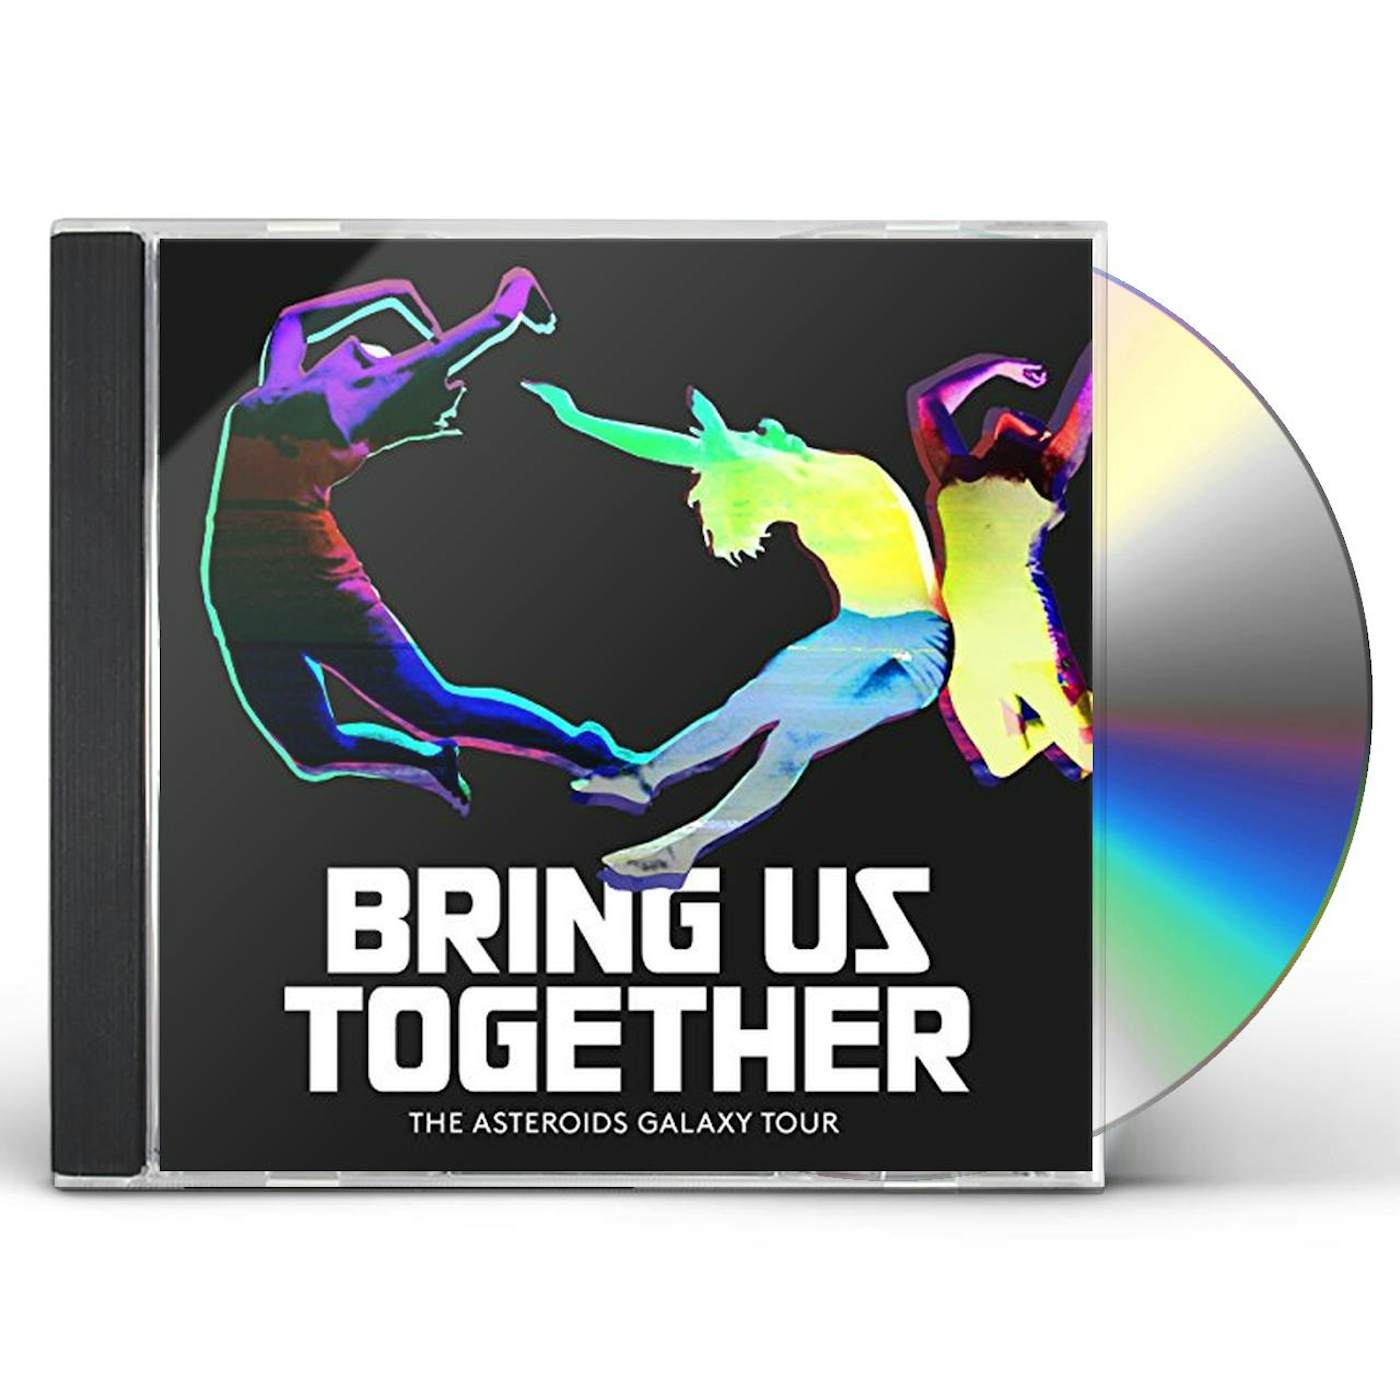 The Asteroids Galaxy Tour BRING US TOGETHER CD